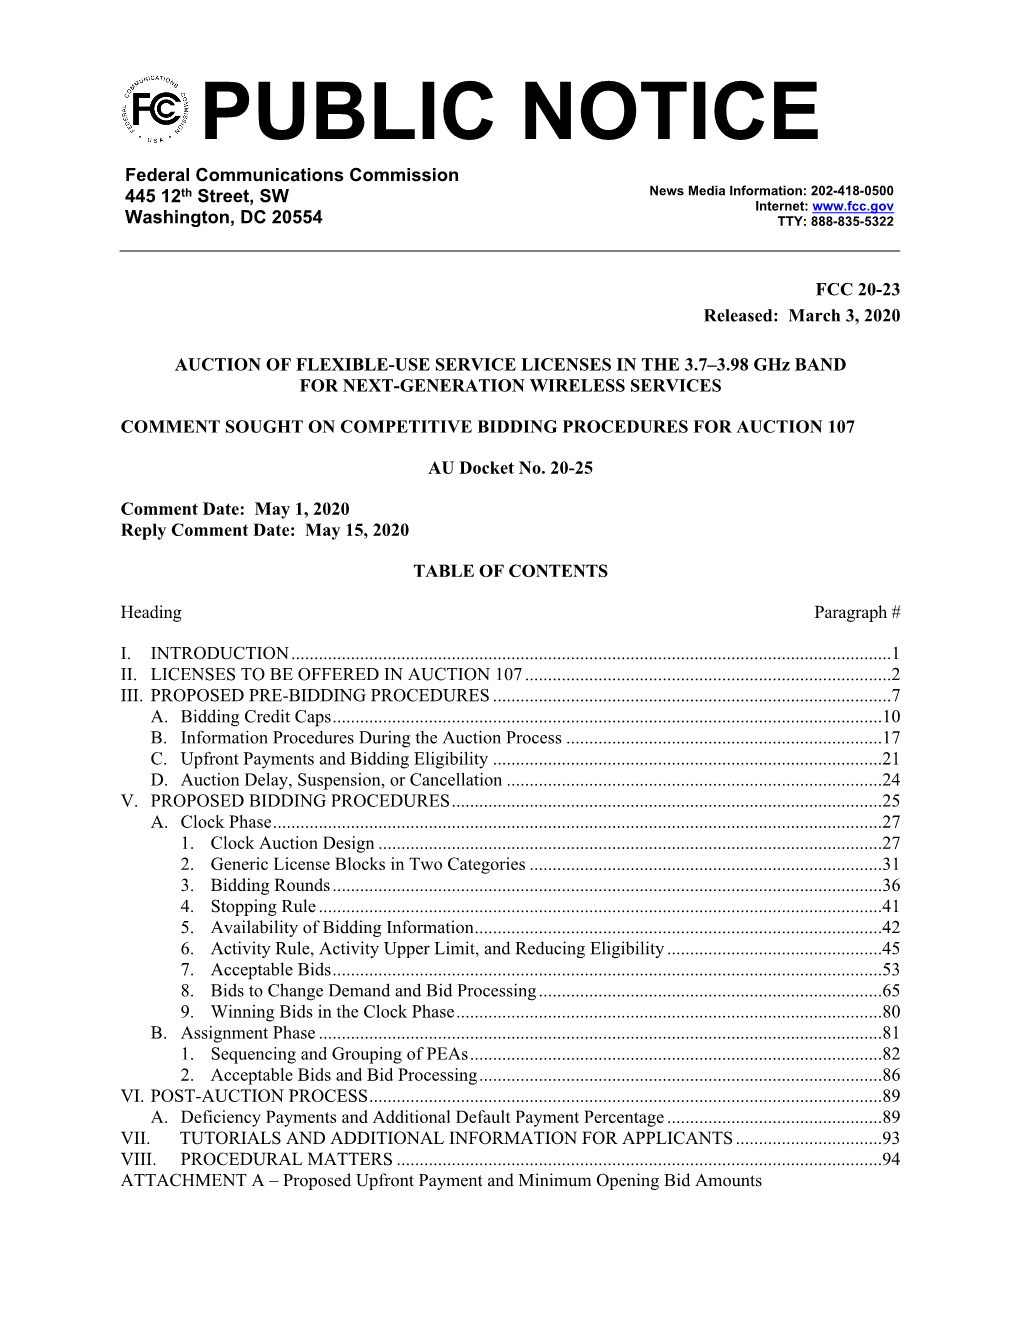 FCC 20-23 Released: March 3, 2020